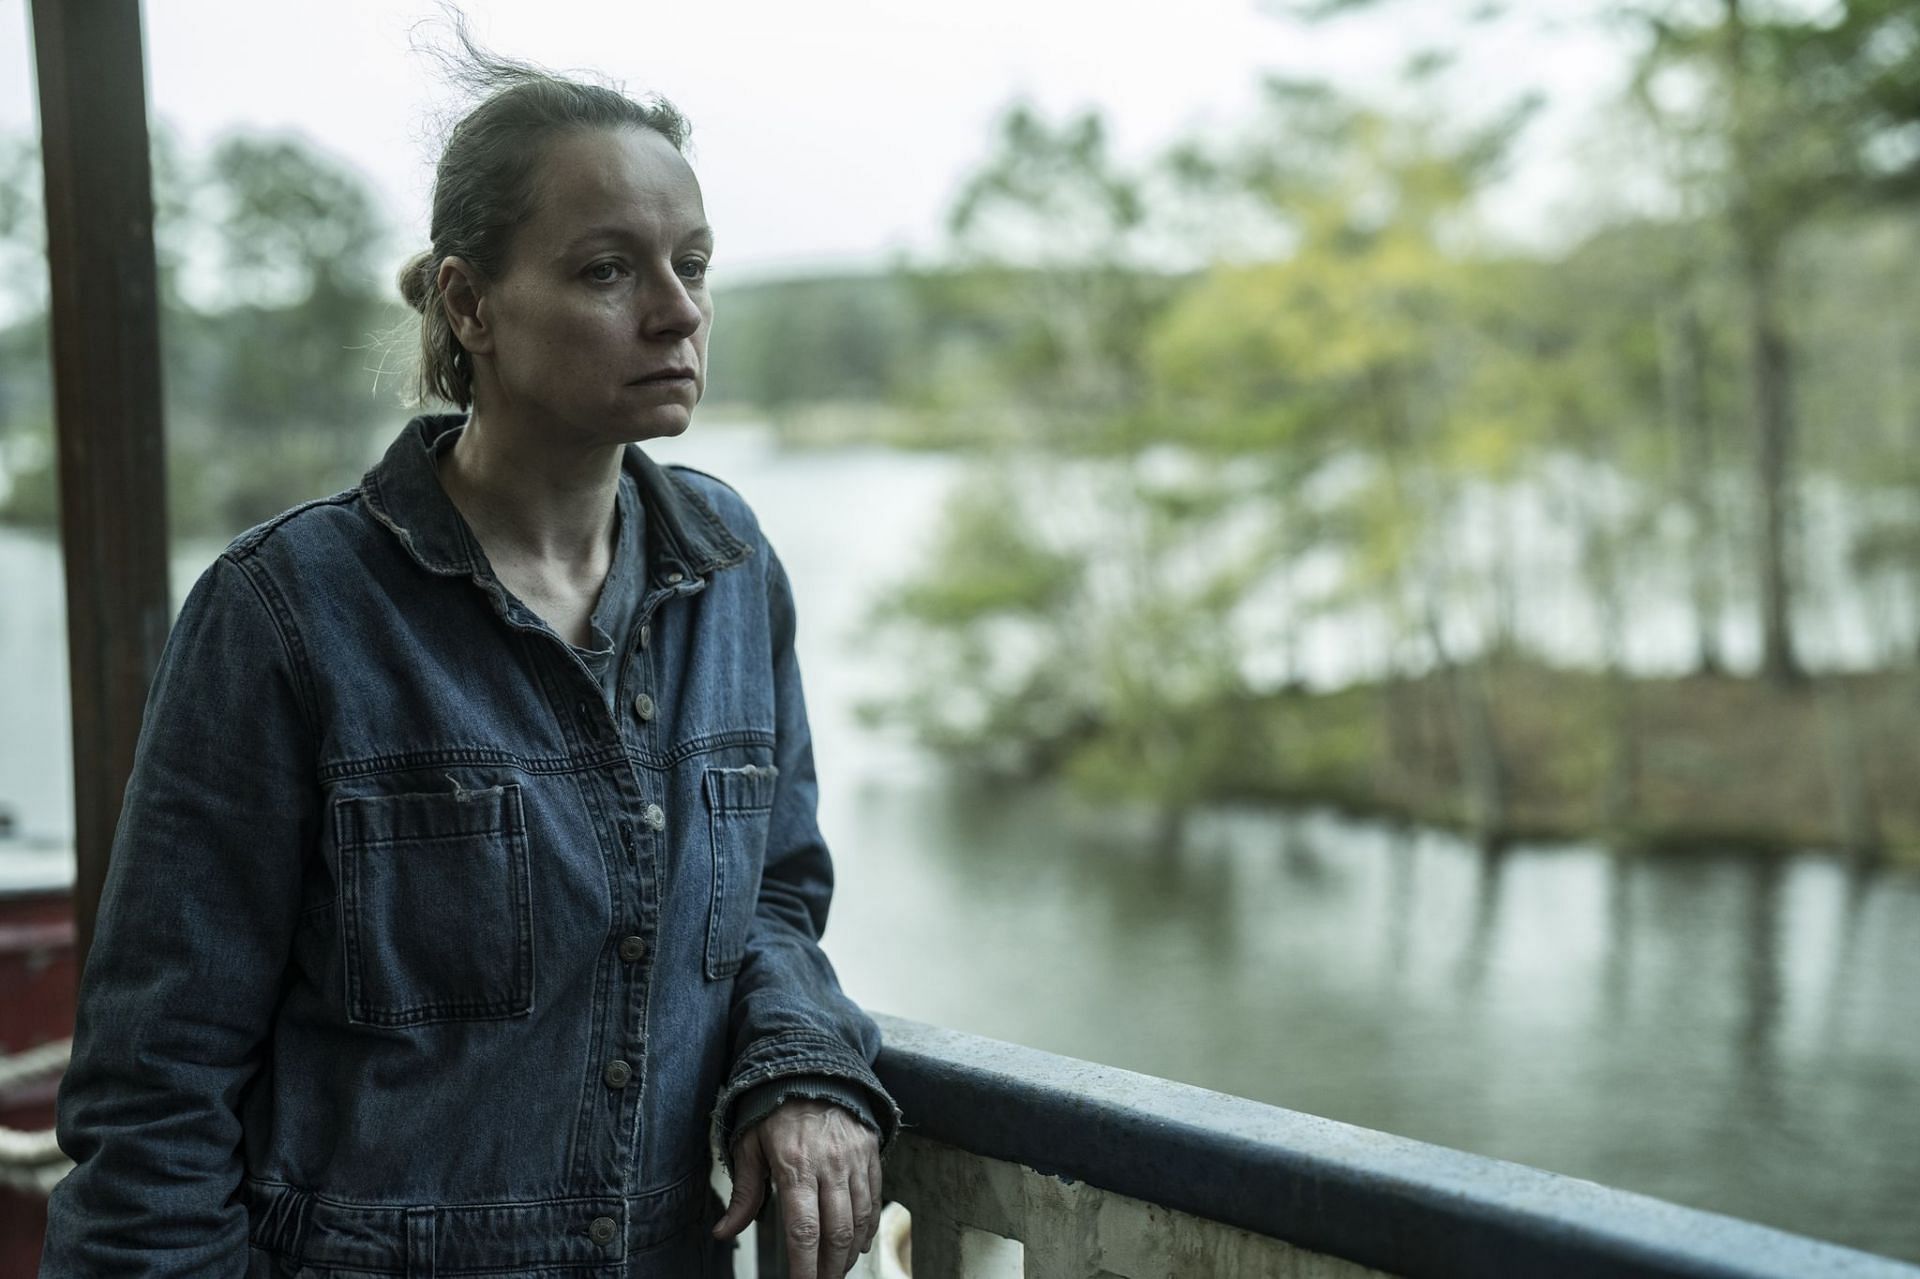 Samantha Morton as Dee/Alpha (Image graciously provided by AMC Networks)